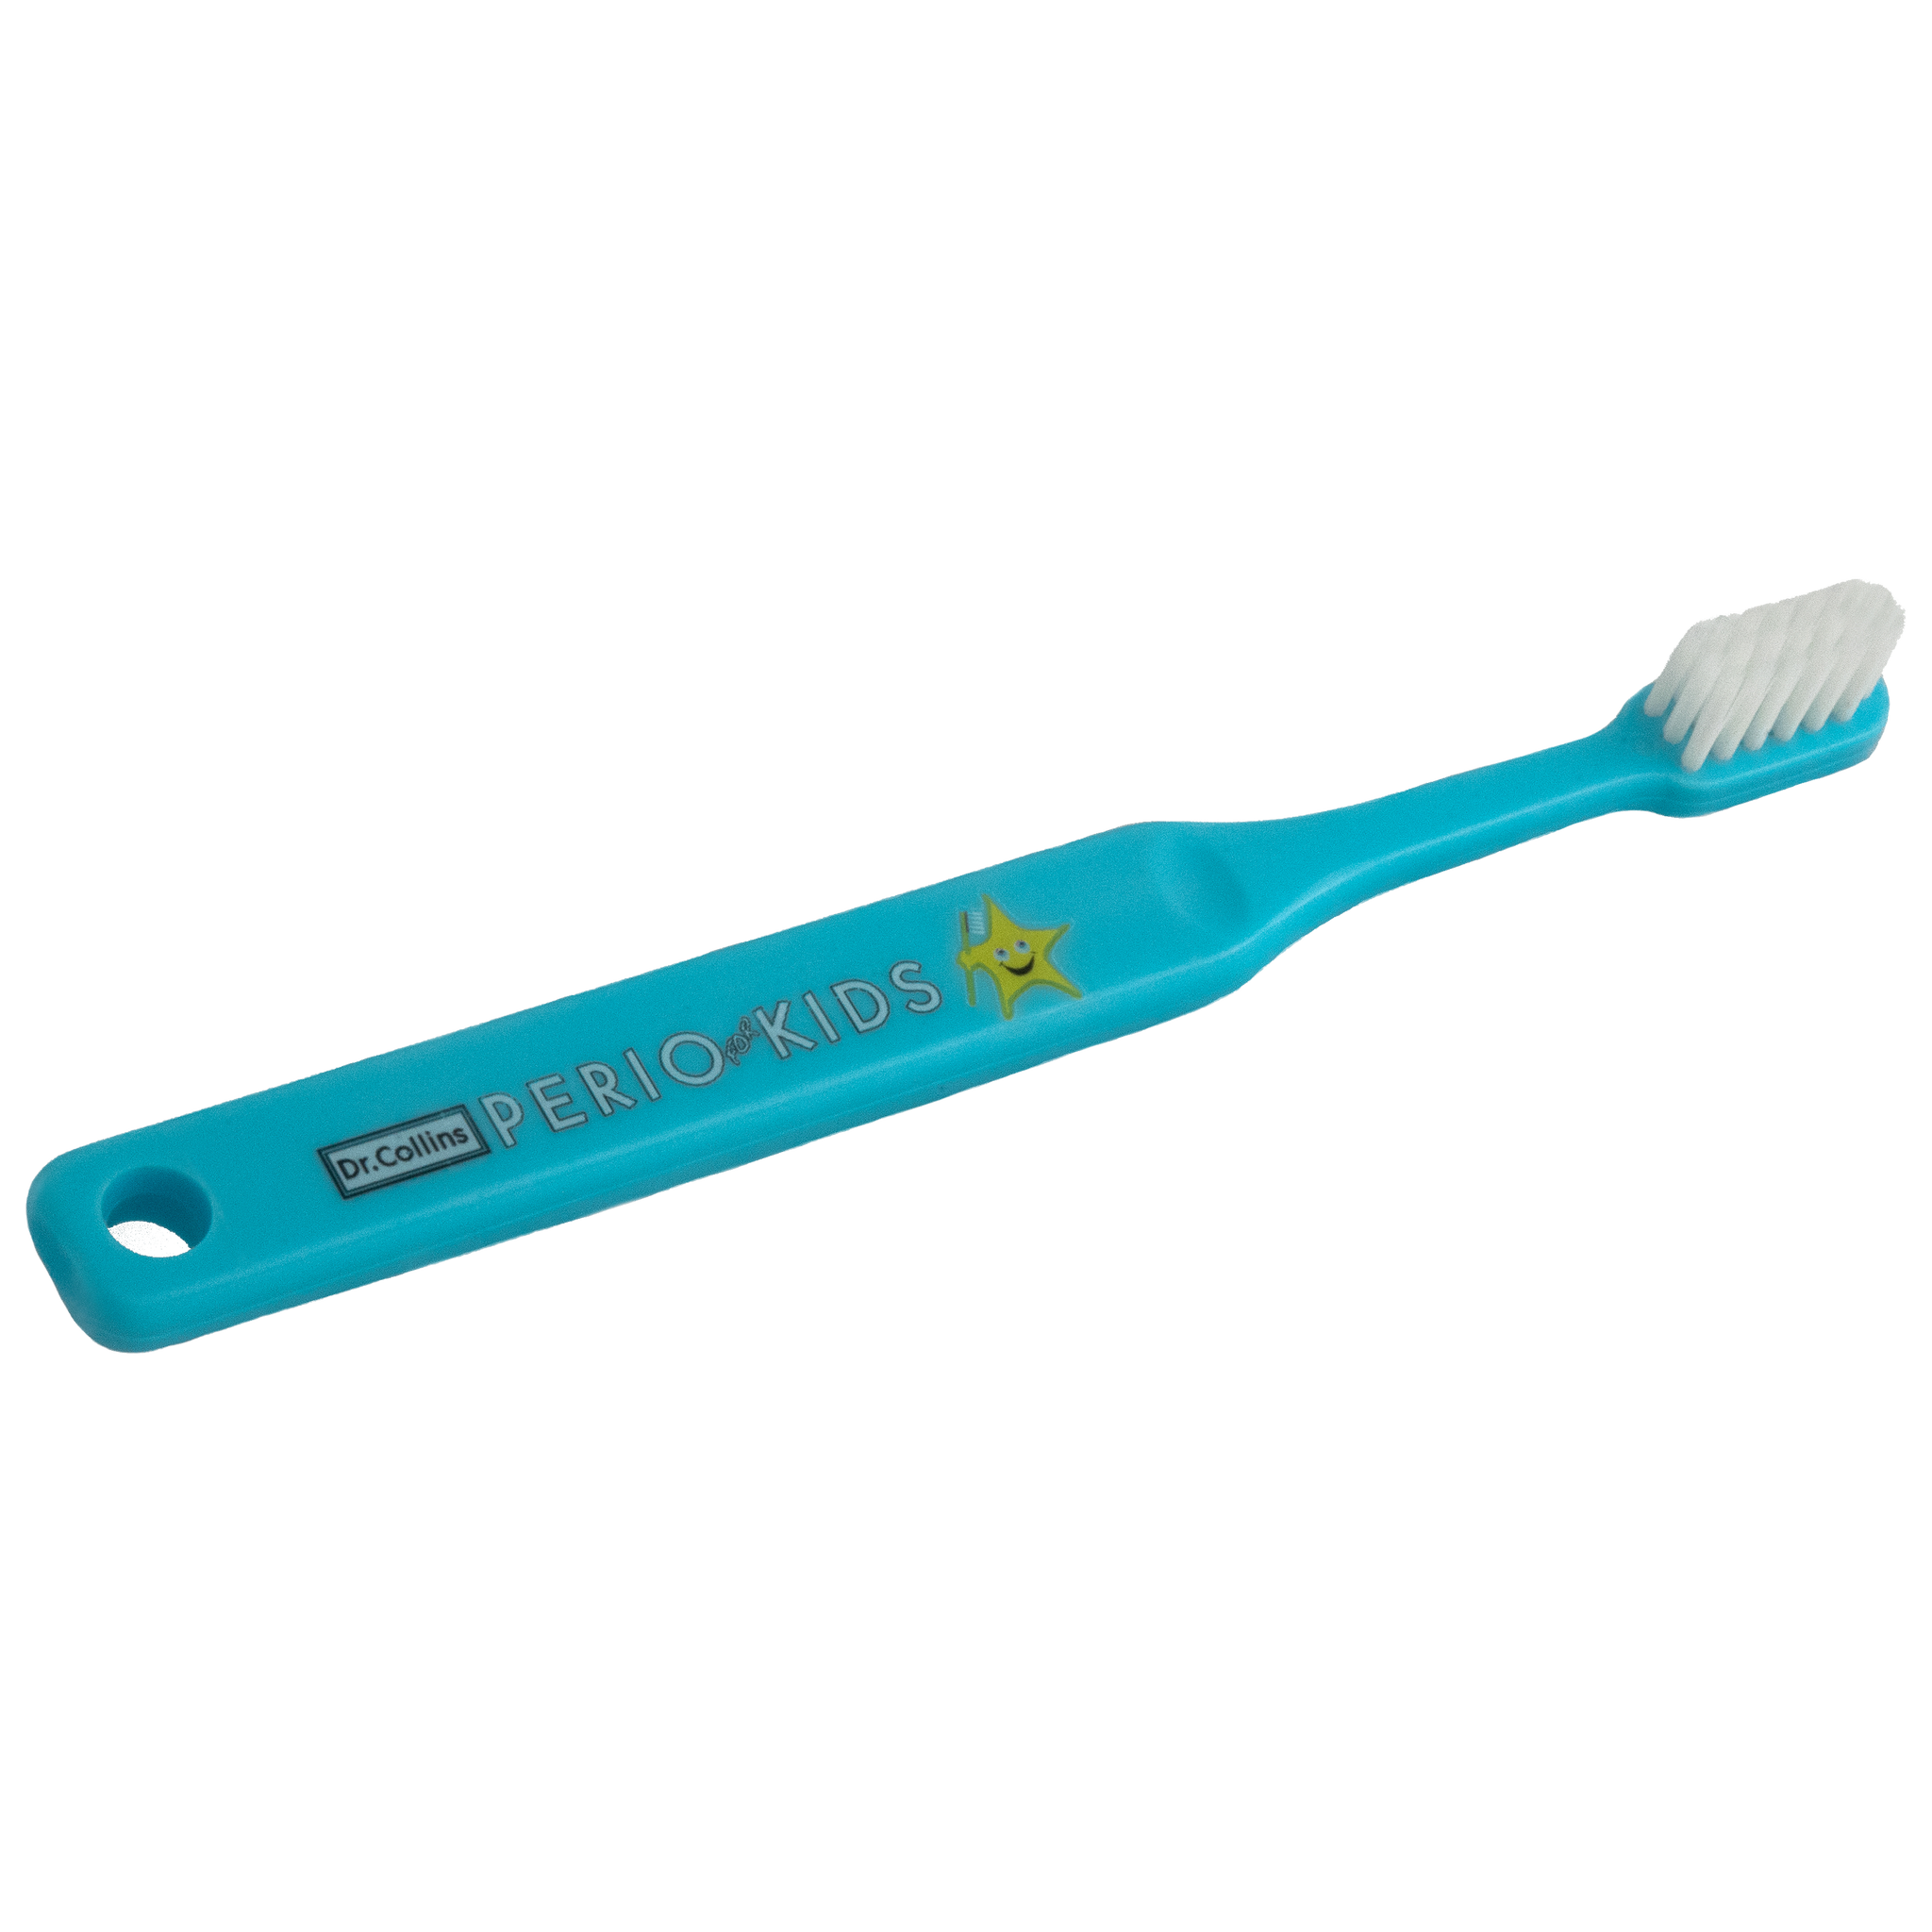 Perio Toothbrush - Dr.Collins, Inc.